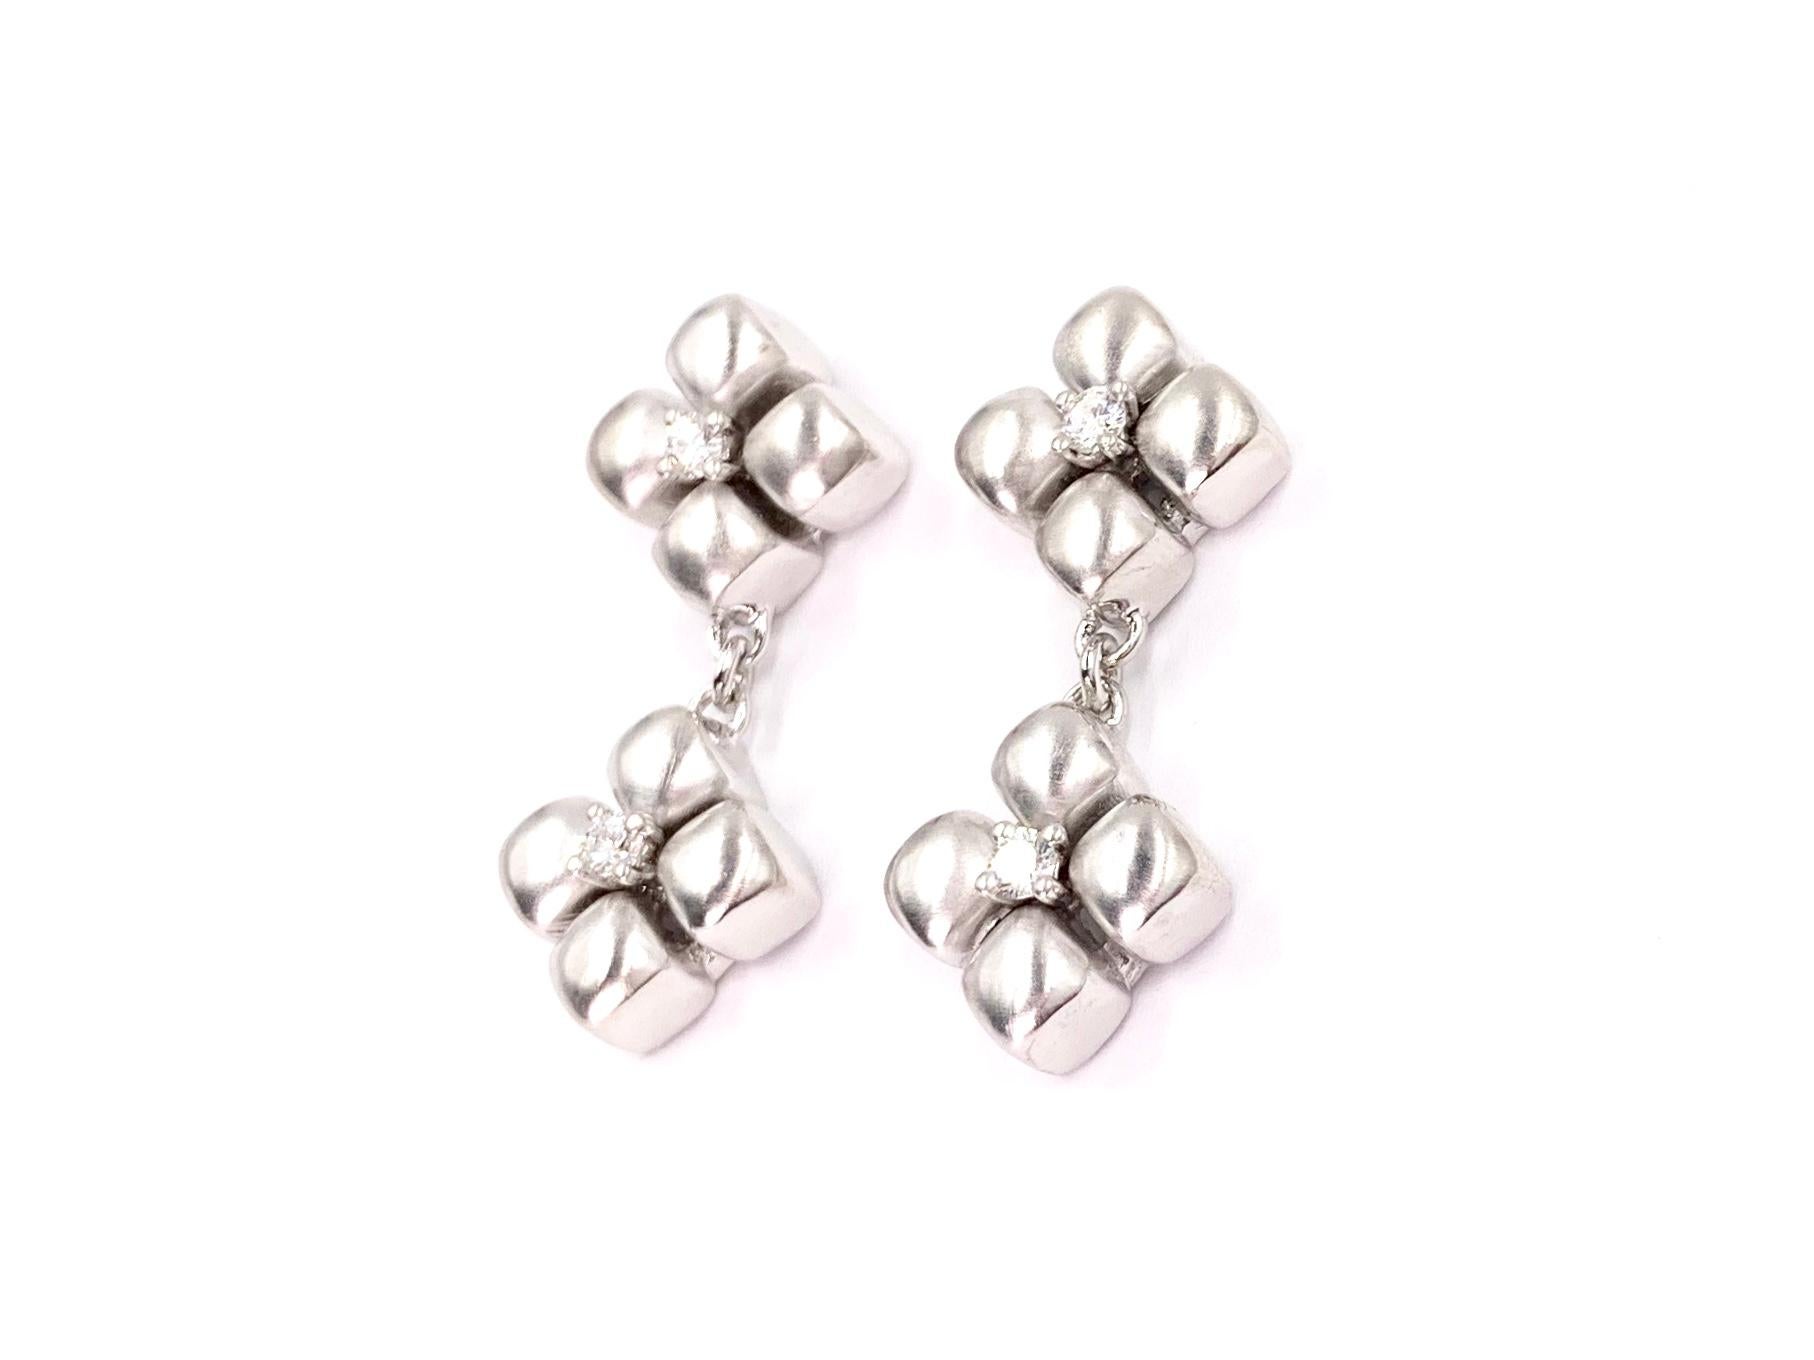 Made with superior quality by Marlene Stowe. These timeless and chic floral drop earrings are made of platinum and 18 karat white gold with a round brilliant diamond set in the center of each flower for a subtle sparkle. Earrings have a diamond